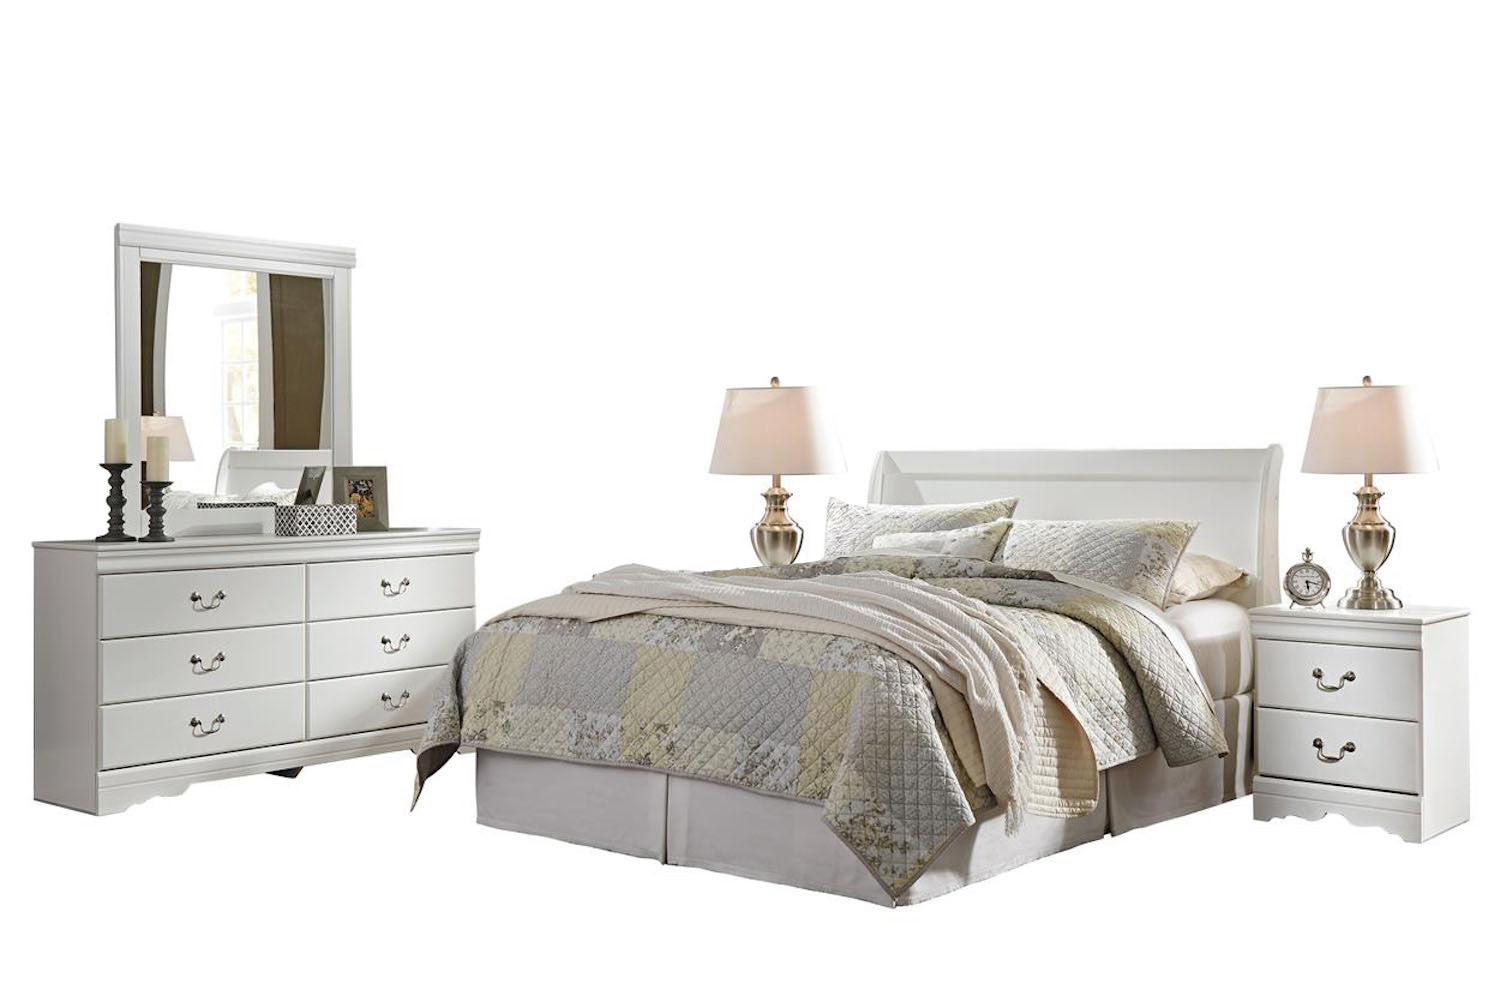 Ashley Anarasia 5PC Queen Sleigh Headboard Bedroom Set With 2 Nightstands In White